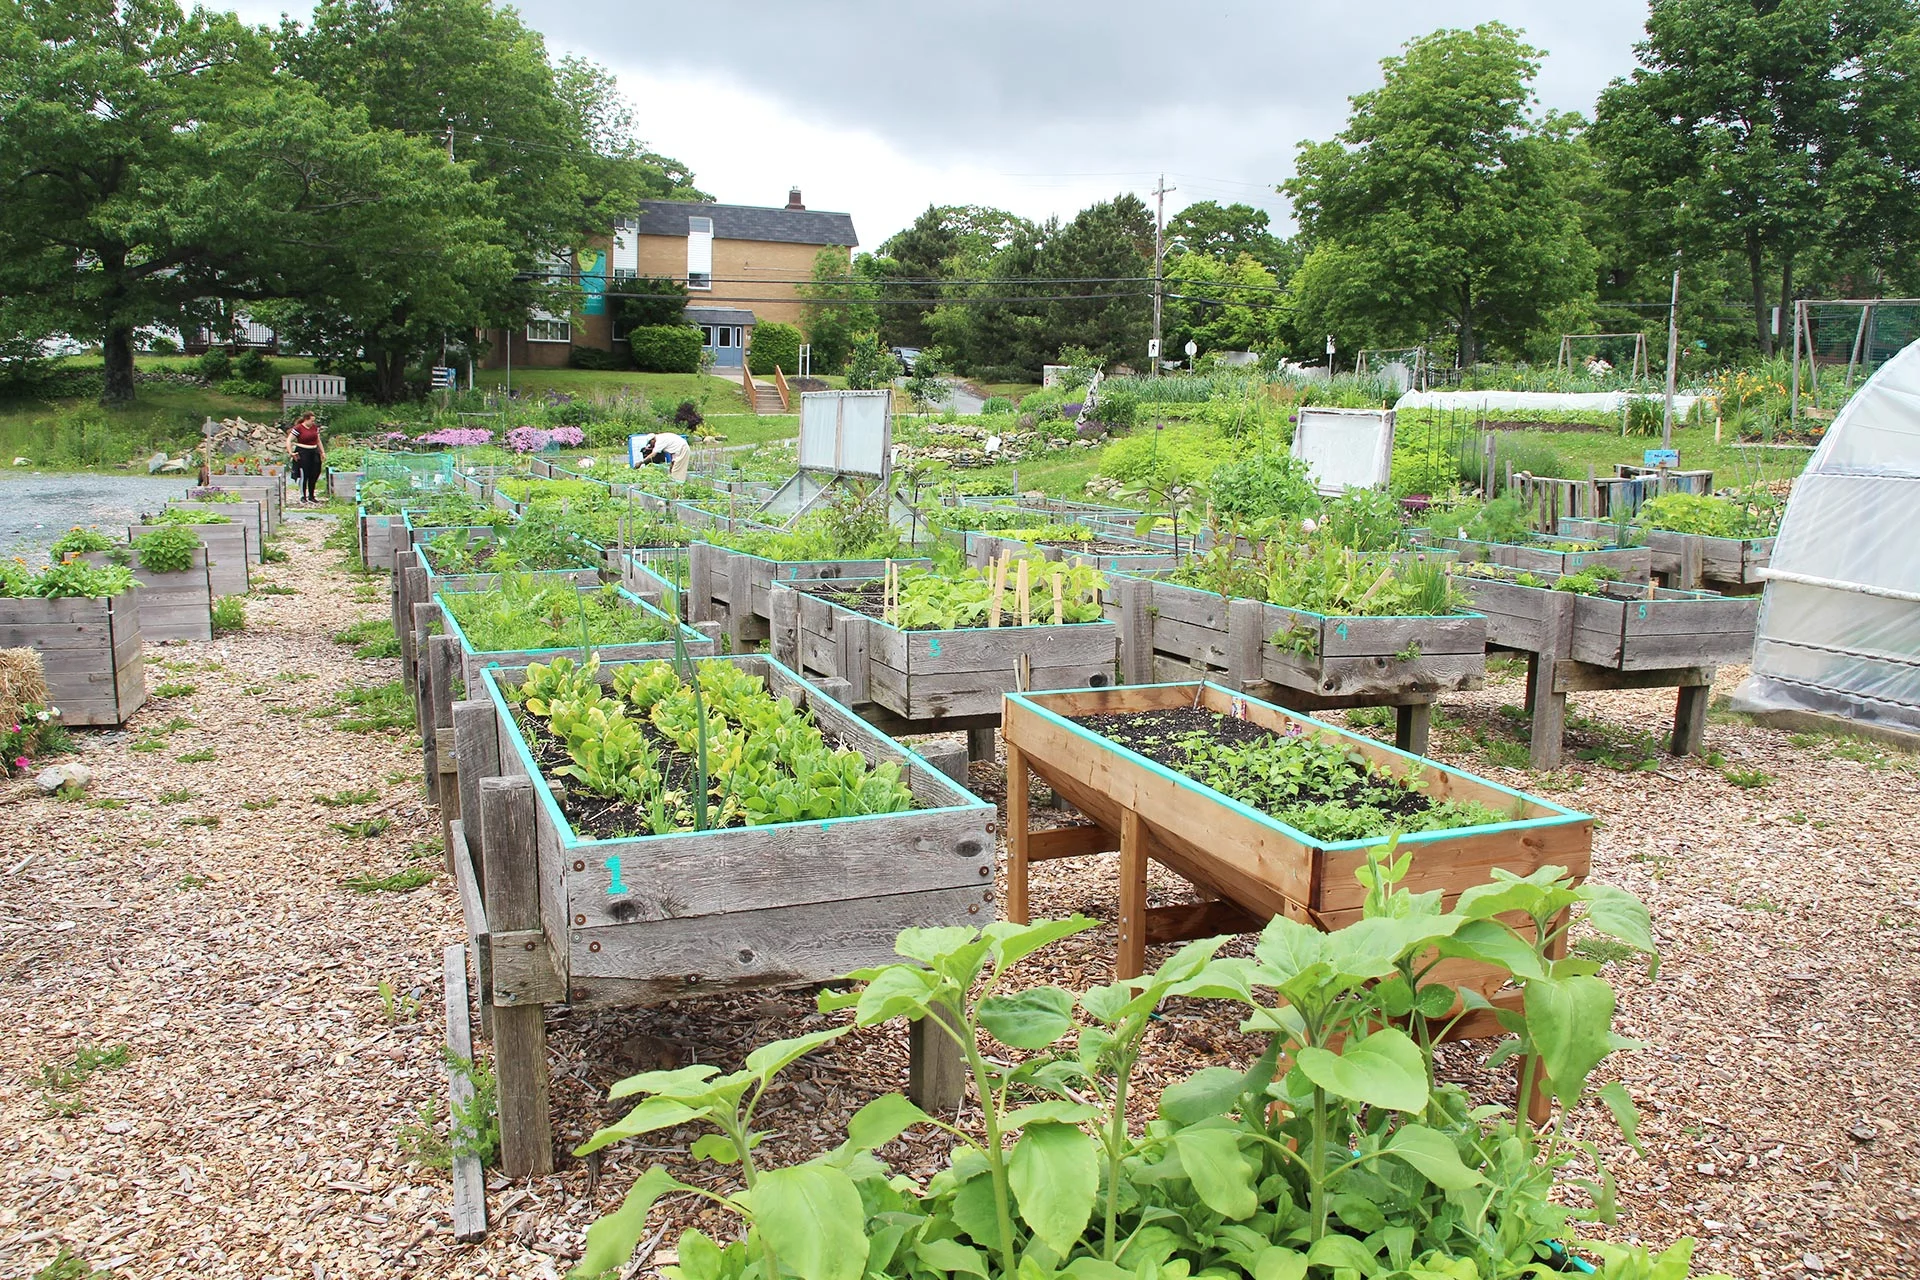 After a day of steady rain, the North Grove Community Farm is looking extra green. (Nathan Coleman)